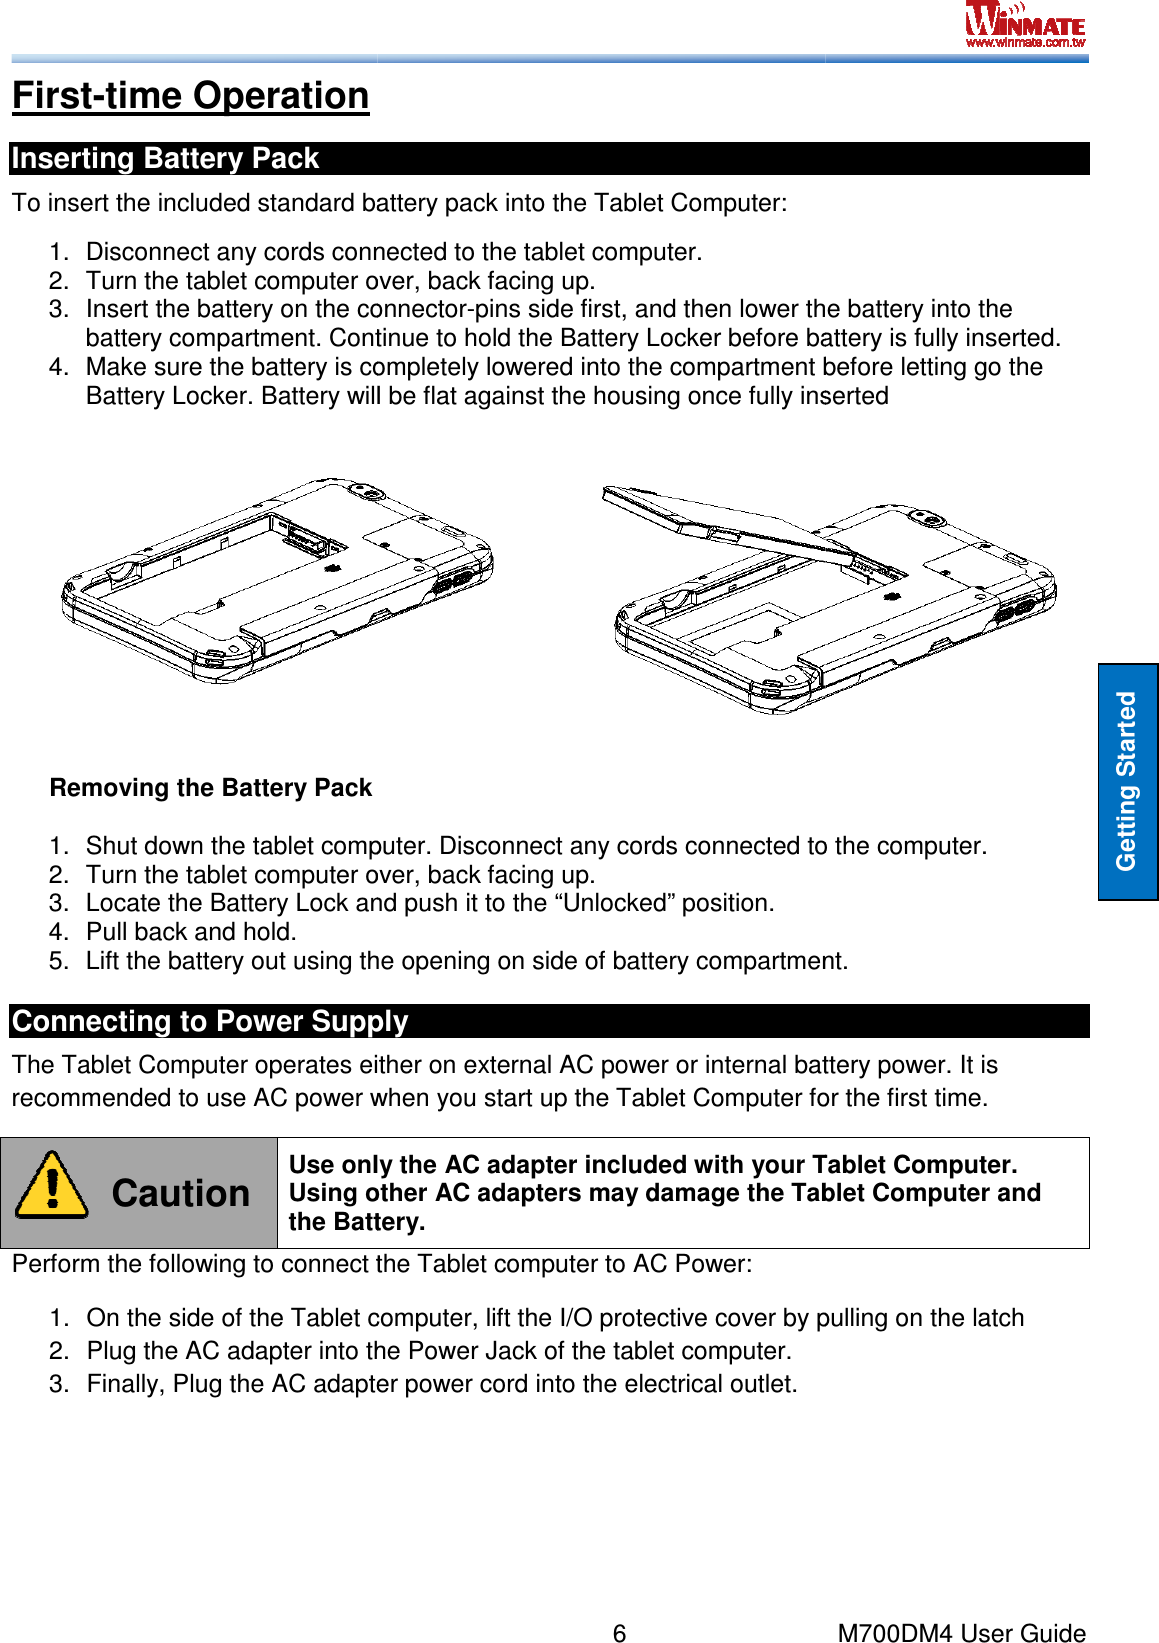  First-time Operation Inserting Battery Pack To insert the included standard battery pack into the Tablet 1. Disconnect any cords connected to the tablet computer.2. Turn the tablet computer over, back facing up.3. Insert the battery on the connectorbattery compartment. Continue to hold the Battery Locke4. Make sure the battery is completely lowered into the compartment before letting go the Battery Locker. Battery will be flat against the housing once fully inserted  Removing the Battery Pack 1.  Shut down the tablet computer. Disconnect any cords connected to the computer.2.  Turn the tablet computer over, back facing up.3.  Locate the Battery Lock and push it to the “Unlocked” position.4.  Pull back and hold. 5. Lift the battery out using the opening on side of battery compartmeConnecting to Power SupplyThe Tablet Computer operates either on external AC power or internal battery power. recommended to use AC power when you start up the Tablet Computer for the first time. Caution Use only the AC adapter included with Using other AC adapters may damage the Tablet Computer and the Battery.Perform the following to connect the Tablet computer to AC Power:1. On the side of the Tablet computer, lift the I/O protective cover by pulling on the latch2.  Plug the AC adapter into the Power Jack of the tablet computer.3. Finally, Plug the AC adapter power cord into the electrical outlet.6     To insert the included standard battery pack into the Tablet Computer: Disconnect any cords connected to the tablet computer. Turn the tablet computer over, back facing up. Insert the battery on the connector-pins side first, and then lower the battery into the battery compartment. Continue to hold the Battery Locker before battery is fully inserted.Make sure the battery is completely lowered into the compartment before letting go the Battery Locker. Battery will be flat against the housing once fully inserted  computer. Disconnect any cords connected to the computer.tablet computer over, back facing up. Lock and push it to the “Unlocked” position. Lift the battery out using the opening on side of battery compartment.Connecting to Power Supply The Tablet Computer operates either on external AC power or internal battery power. to use AC power when you start up the Tablet Computer for the first time.Use only the AC adapter included with your Tablet Computer. Using other AC adapters may damage the Tablet Computer and the Battery. Perform the following to connect the Tablet computer to AC Power: On the side of the Tablet computer, lift the I/O protective cover by pulling on the latchthe AC adapter into the Power Jack of the tablet computer. Finally, Plug the AC adapter power cord into the electrical outlet. M700DM4 User Guide Getting Started pins side first, and then lower the battery into the r before battery is fully inserted. Make sure the battery is completely lowered into the compartment before letting go the Battery Locker. Battery will be flat against the housing once fully inserted  computer. Disconnect any cords connected to the computer. nt. The Tablet Computer operates either on external AC power or internal battery power. It is to use AC power when you start up the Tablet Computer for the first time. your Tablet Computer. Using other AC adapters may damage the Tablet Computer and On the side of the Tablet computer, lift the I/O protective cover by pulling on the latch 